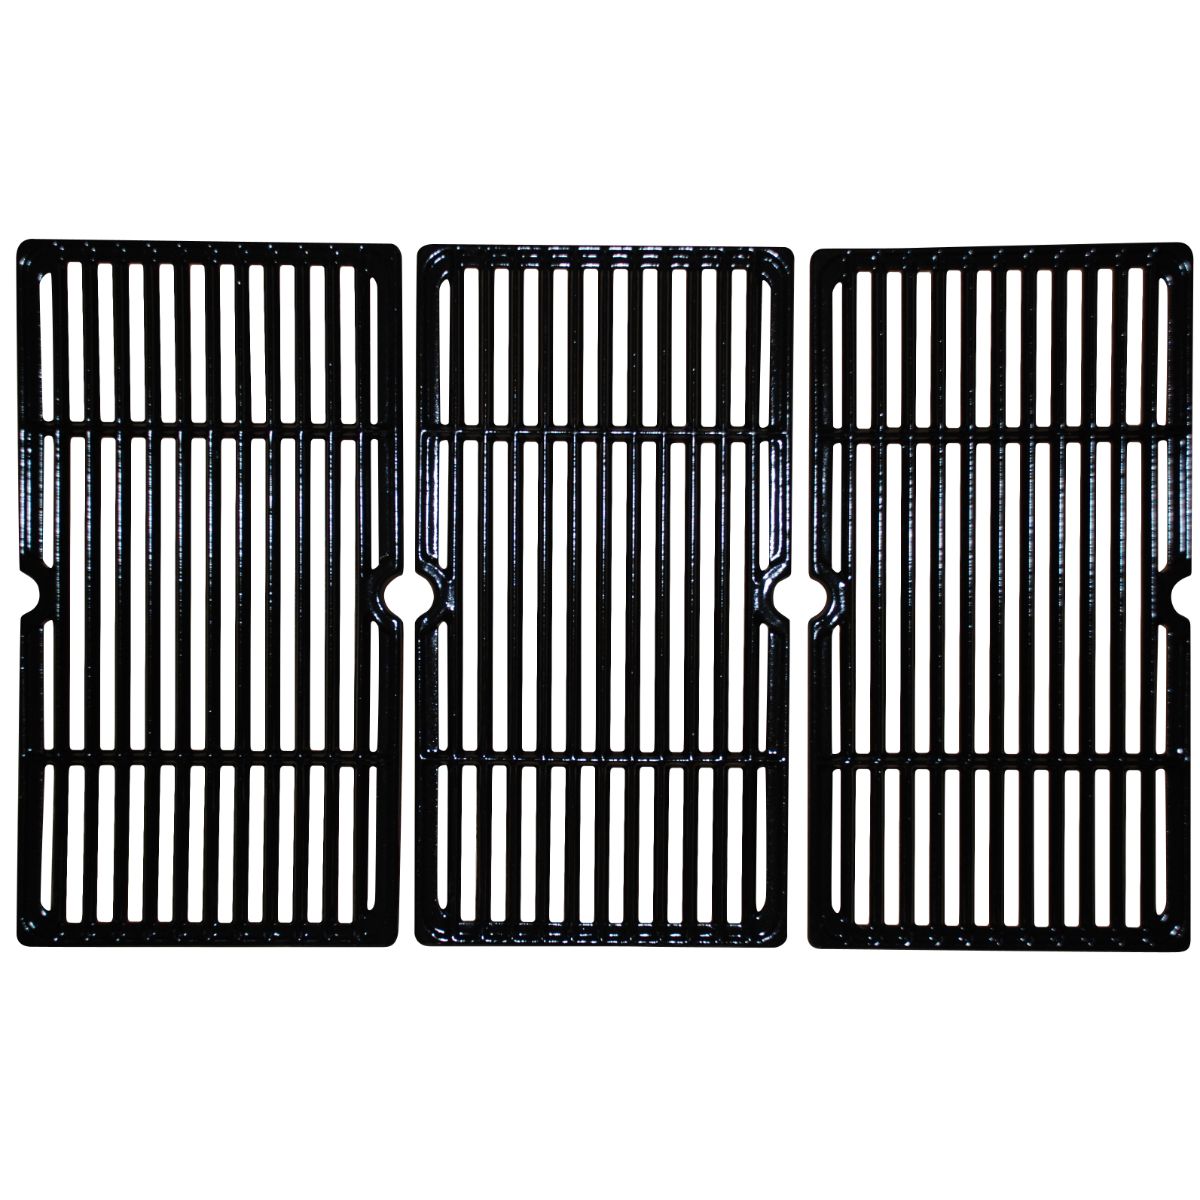 Gloss cast iron cooking grid for Charbroil brand gas grills